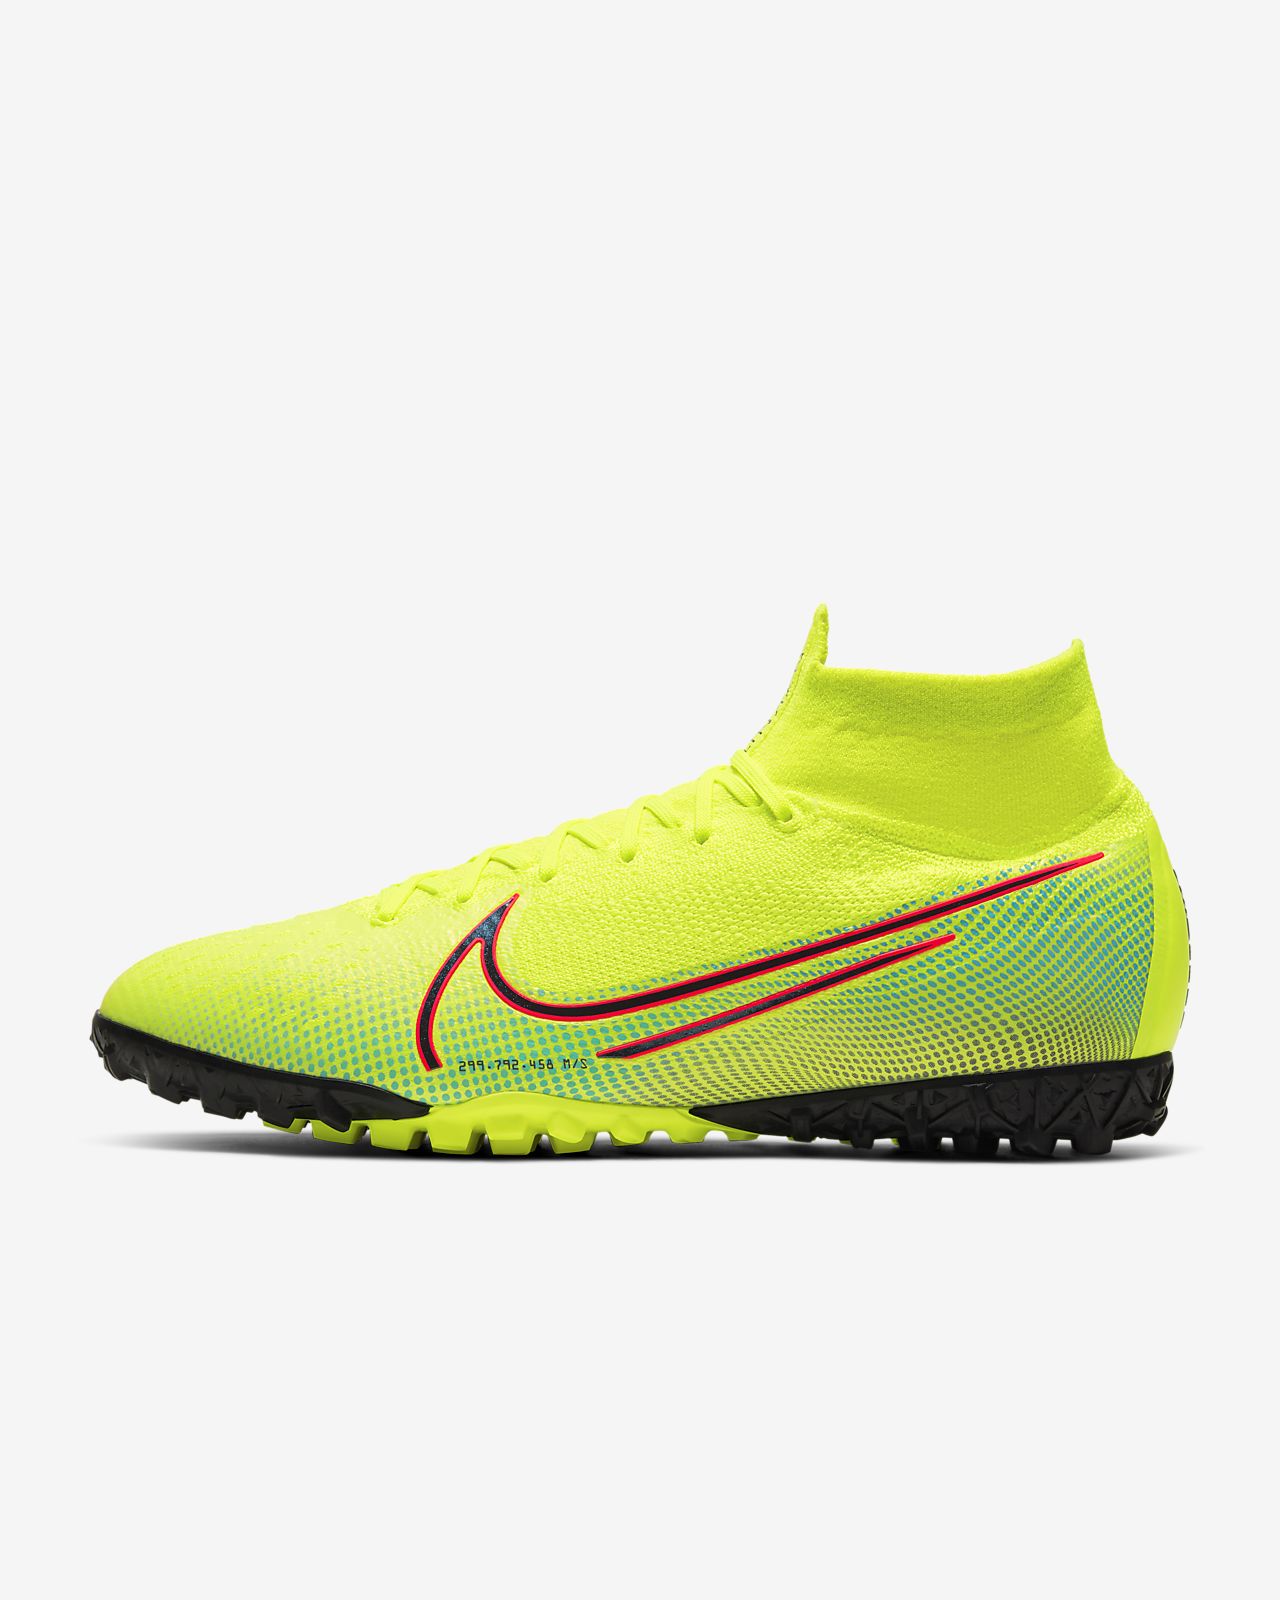 Nike Mercurial Superfly 7 Elite Limited Edition Review U Like.